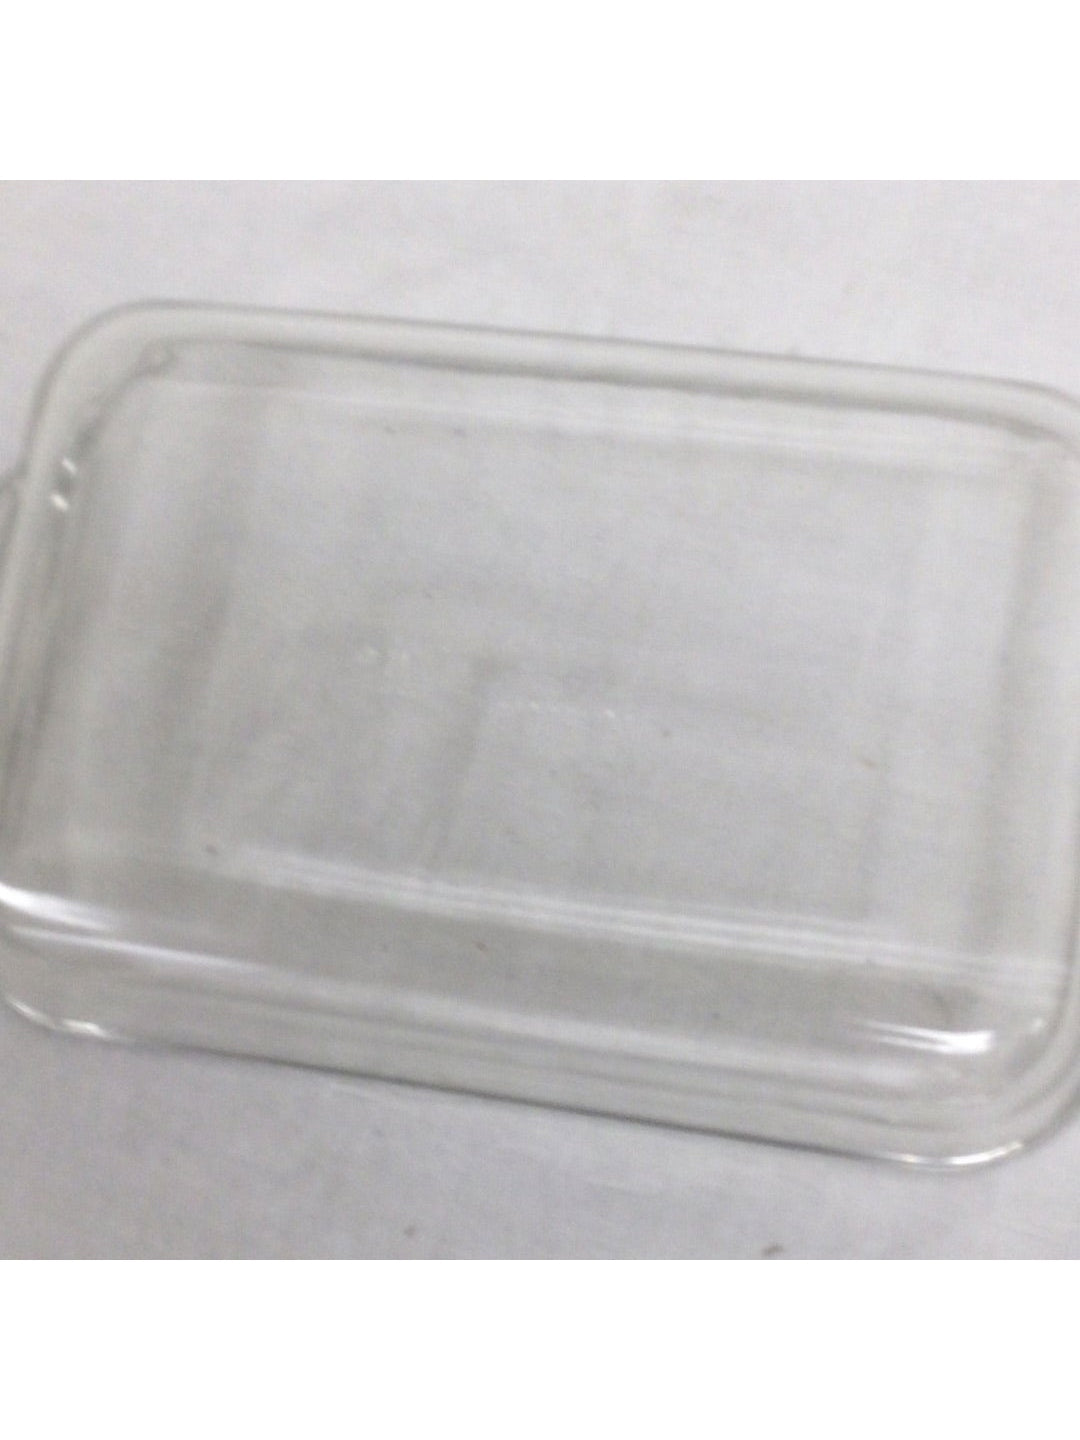 Pyrex clear glass casserole - The Kennedy Collective Thrift - 